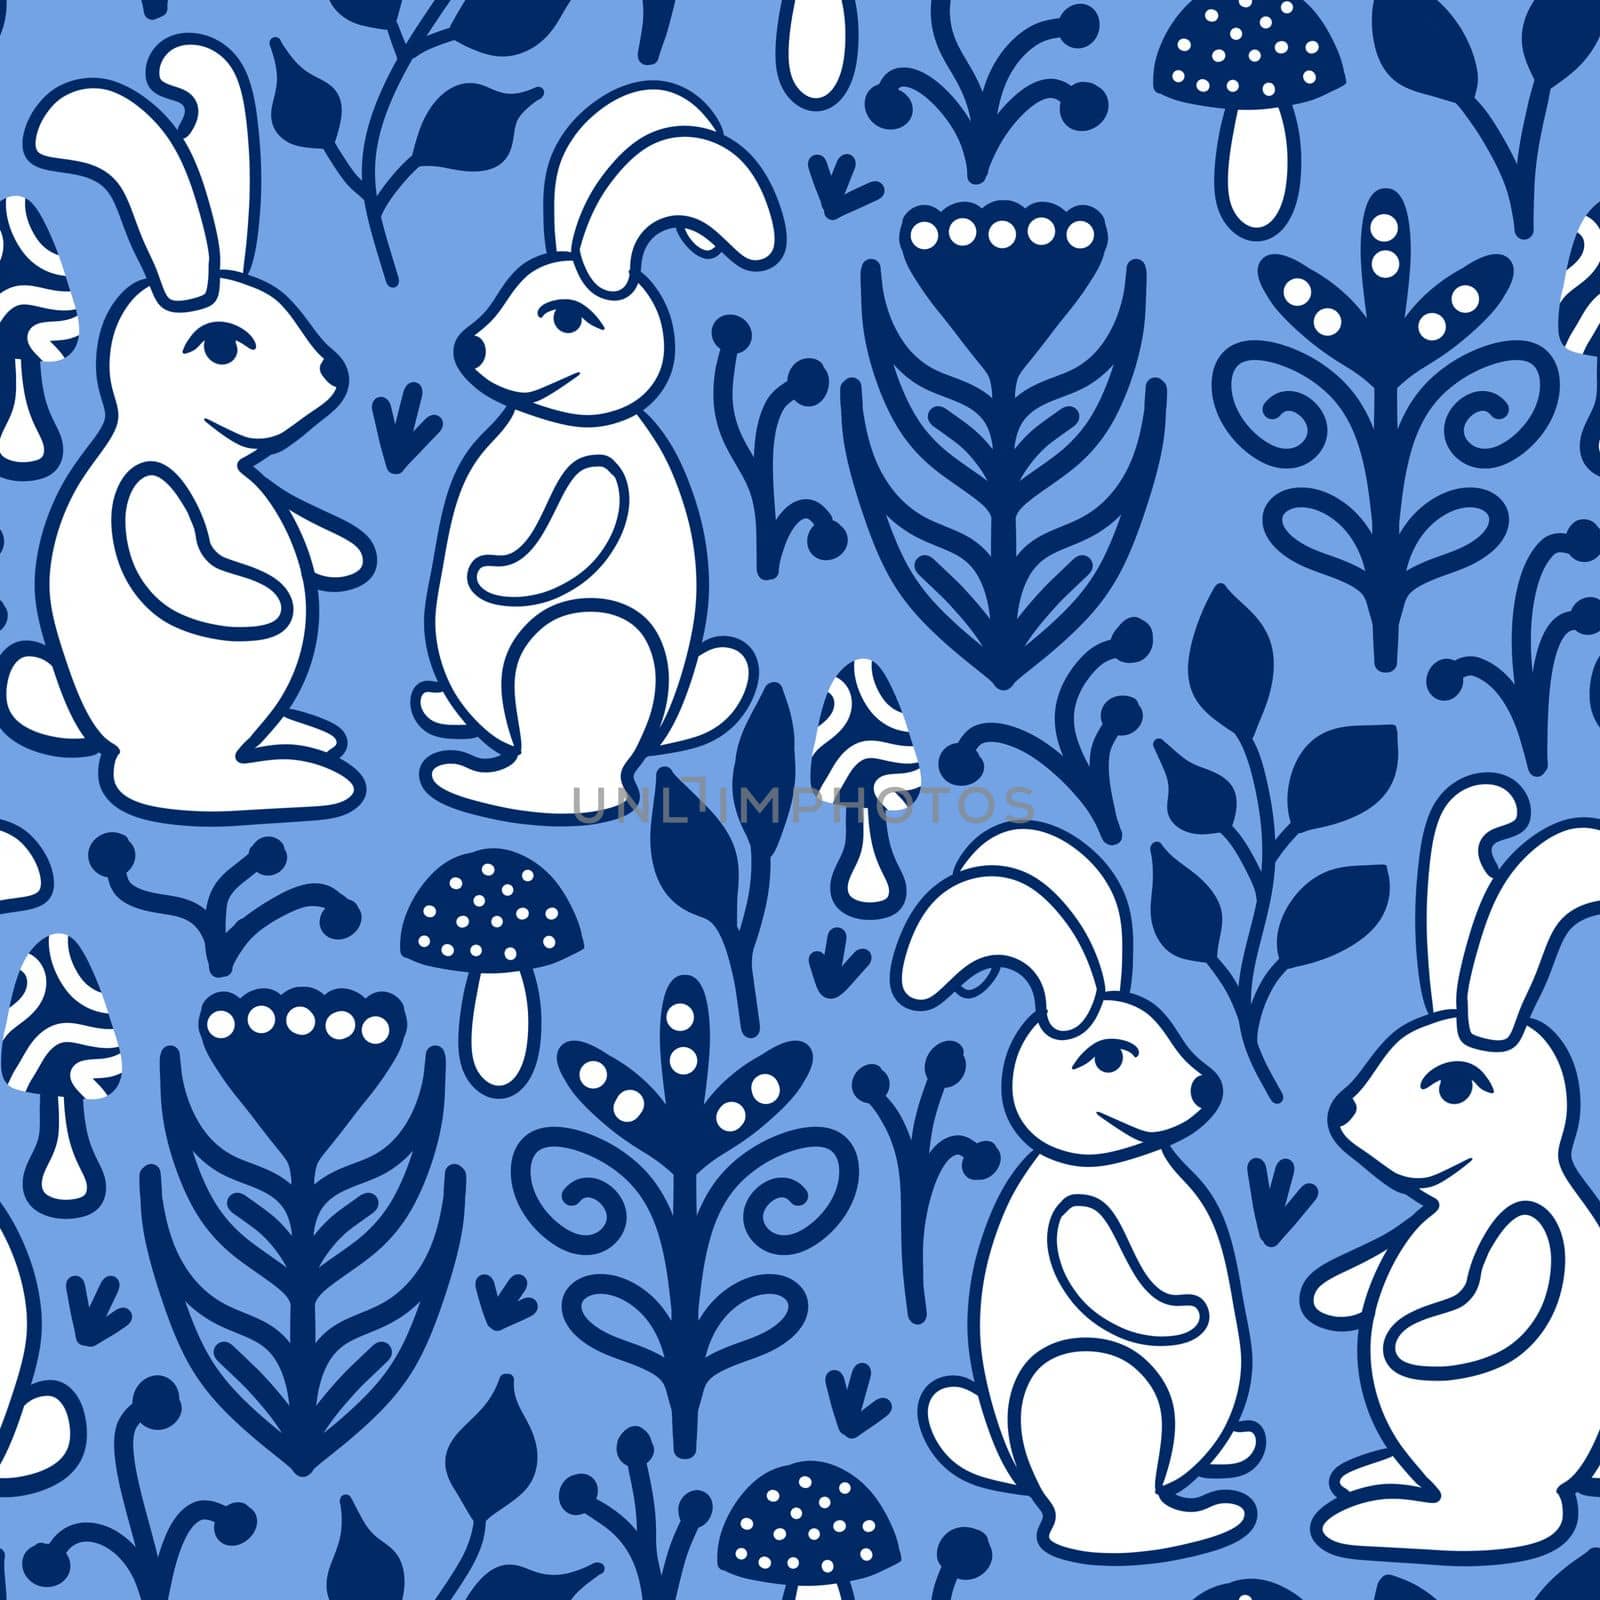 Hand drawn seamless pattern with rabbit bunny on blue background. Scandinavian nordic folk art style, winter forest wood woodland mushrooms. Easter, symbol 2023 decoration for kids children. by Lagmar